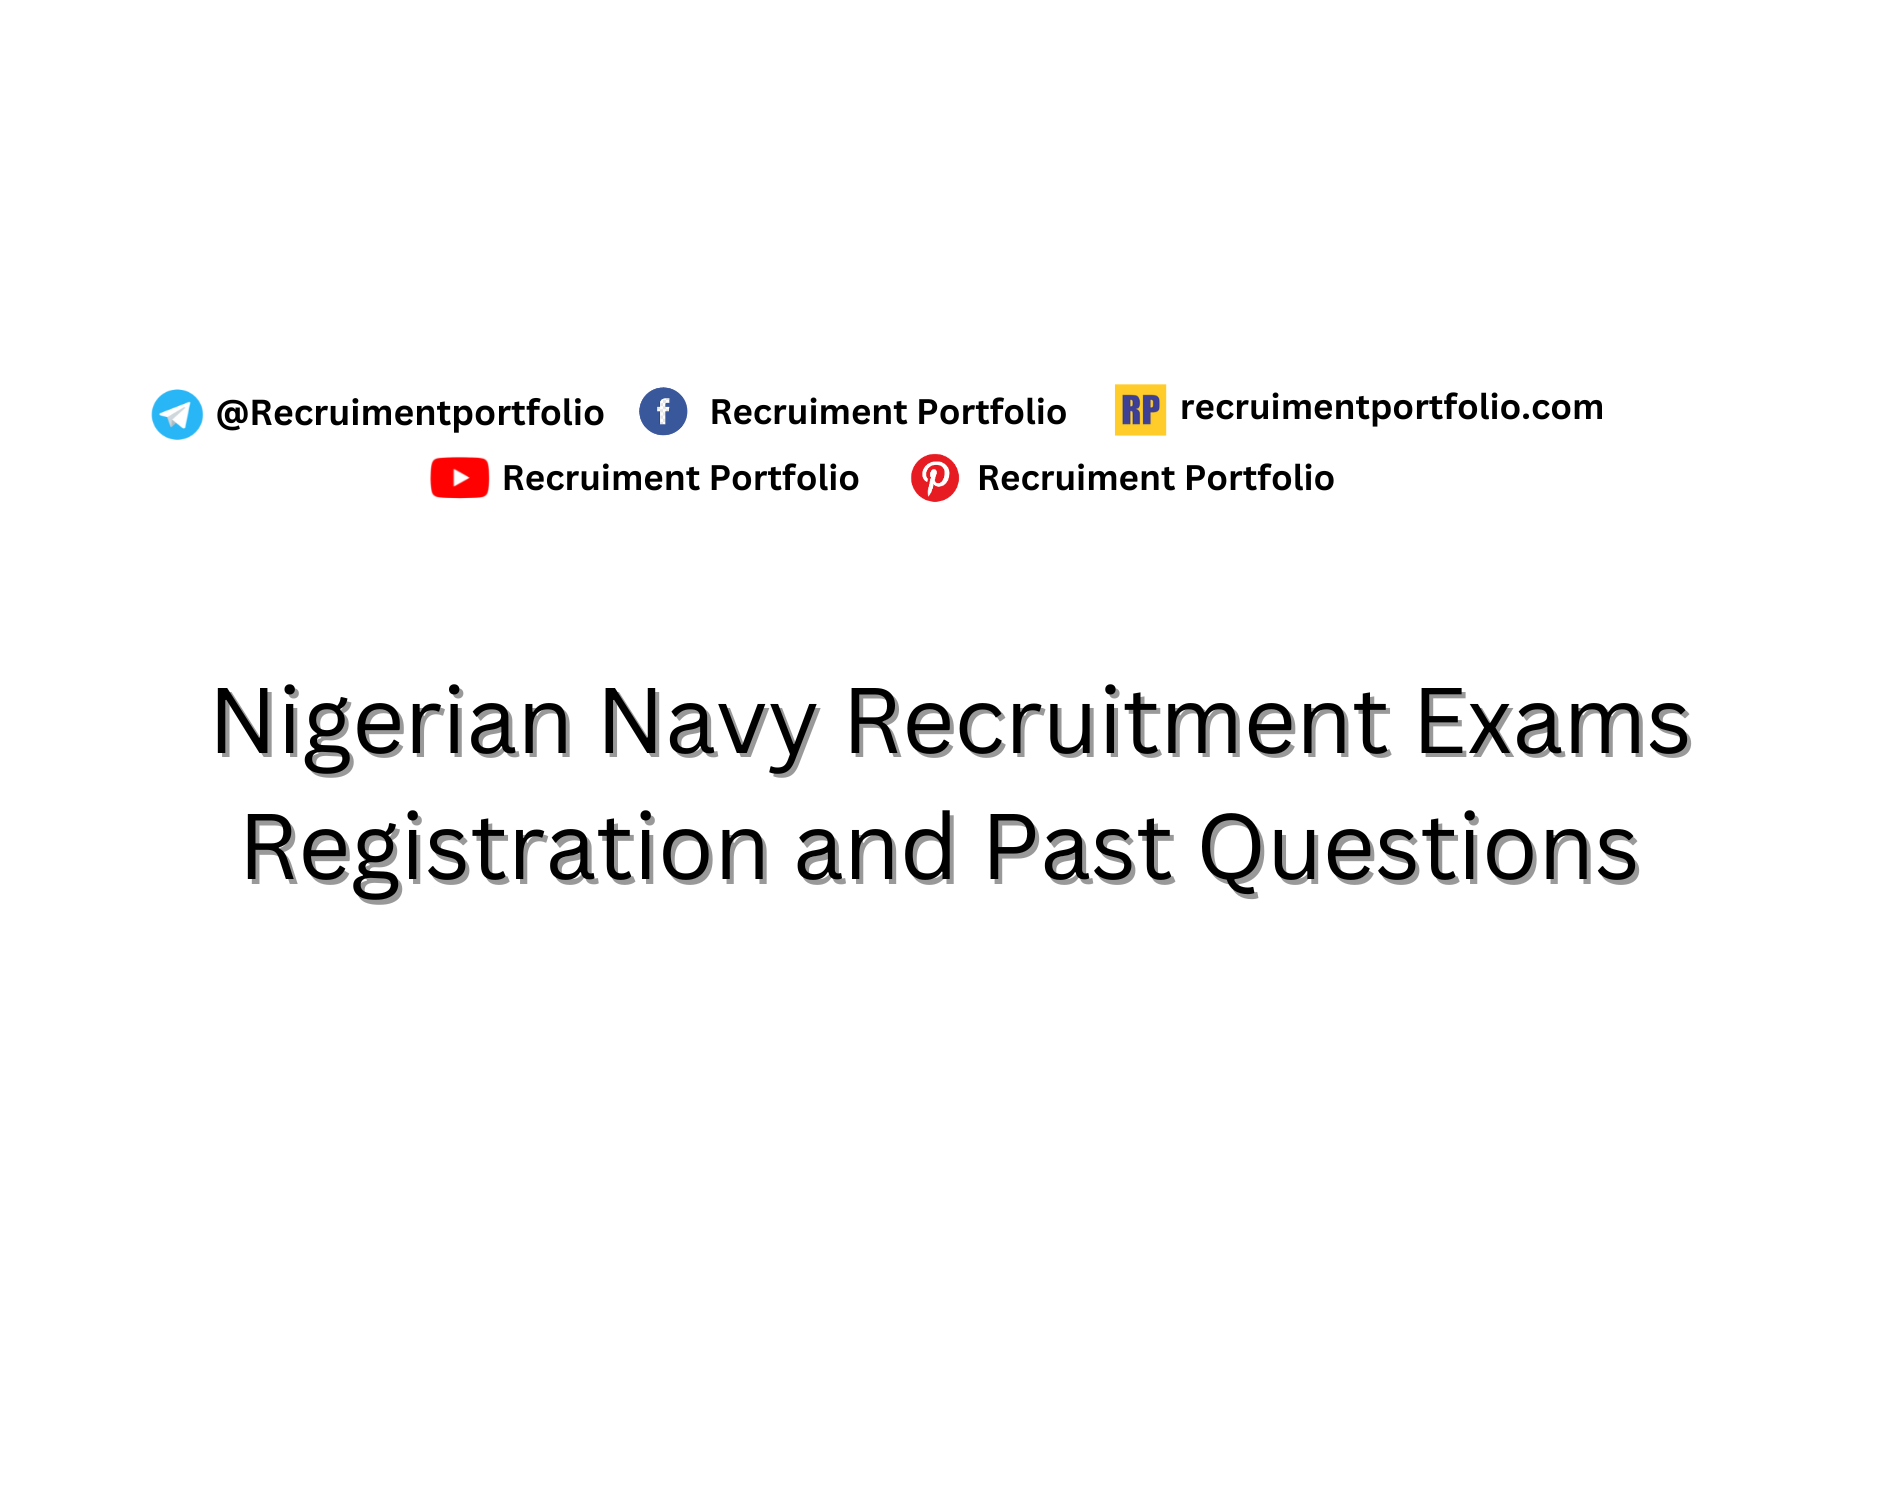 Nigerian Navy Recruitment Exams Past Questions and Answers